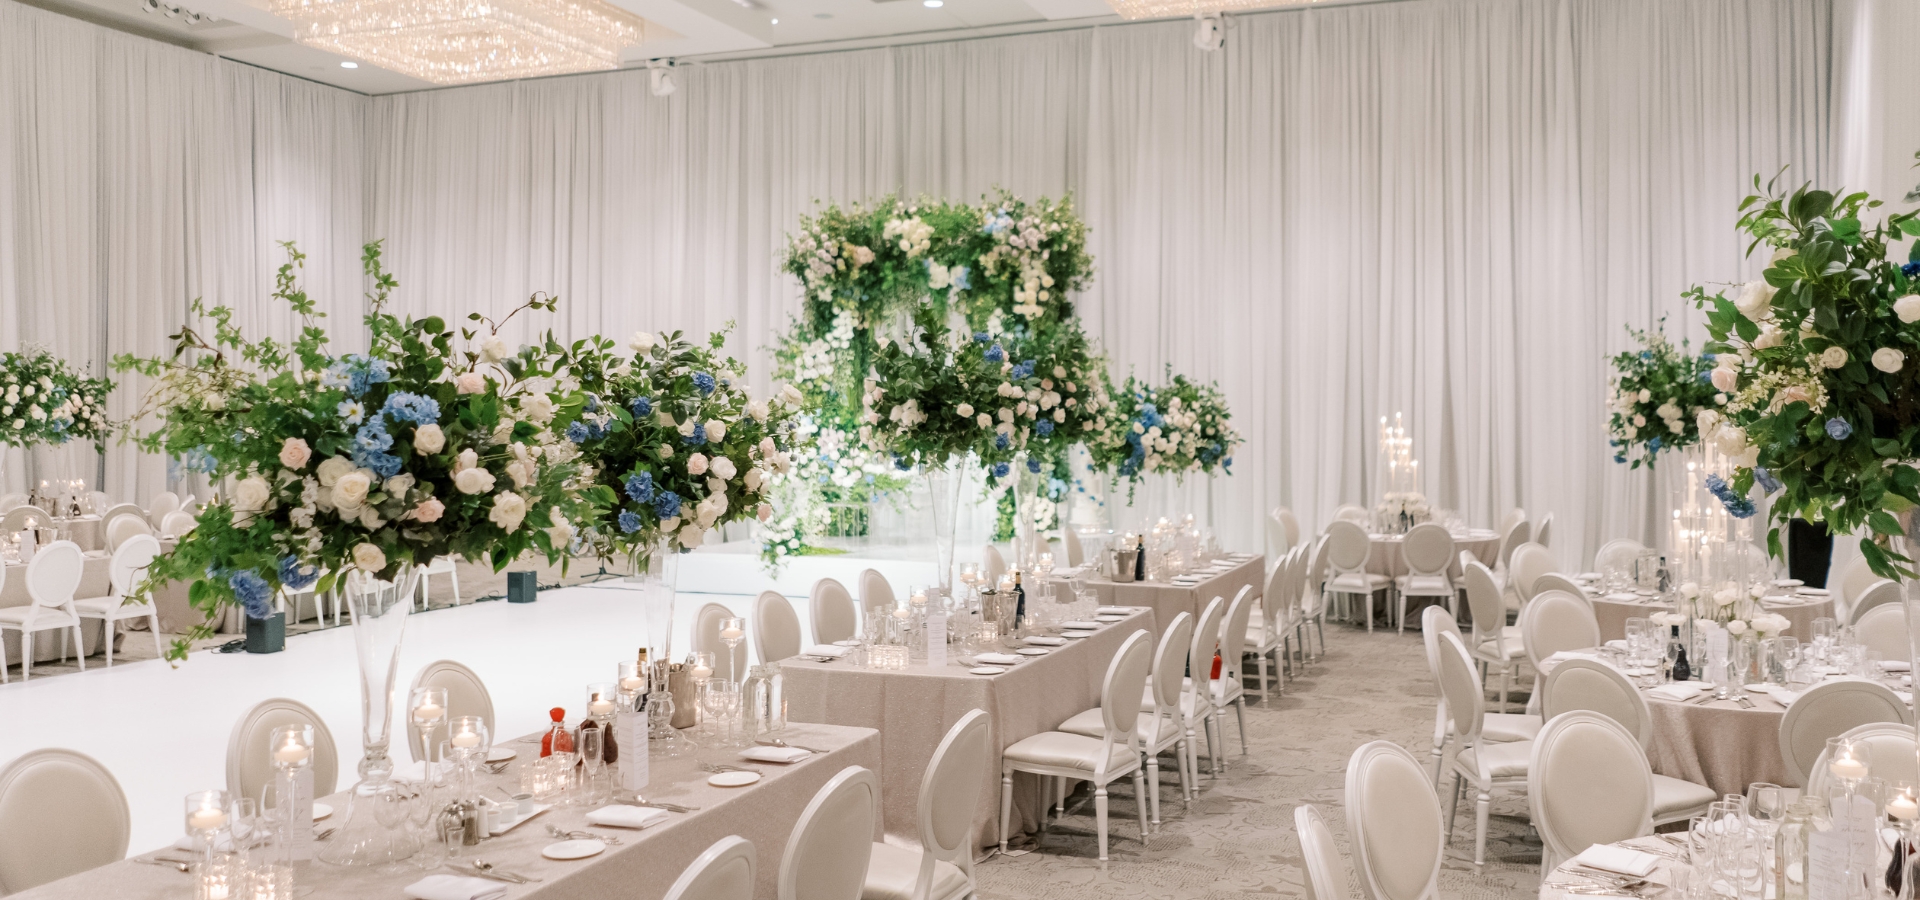 Hero image for Trang and Steven’s Elegant Cinderella inspired Wedding at Chateau Le Parc